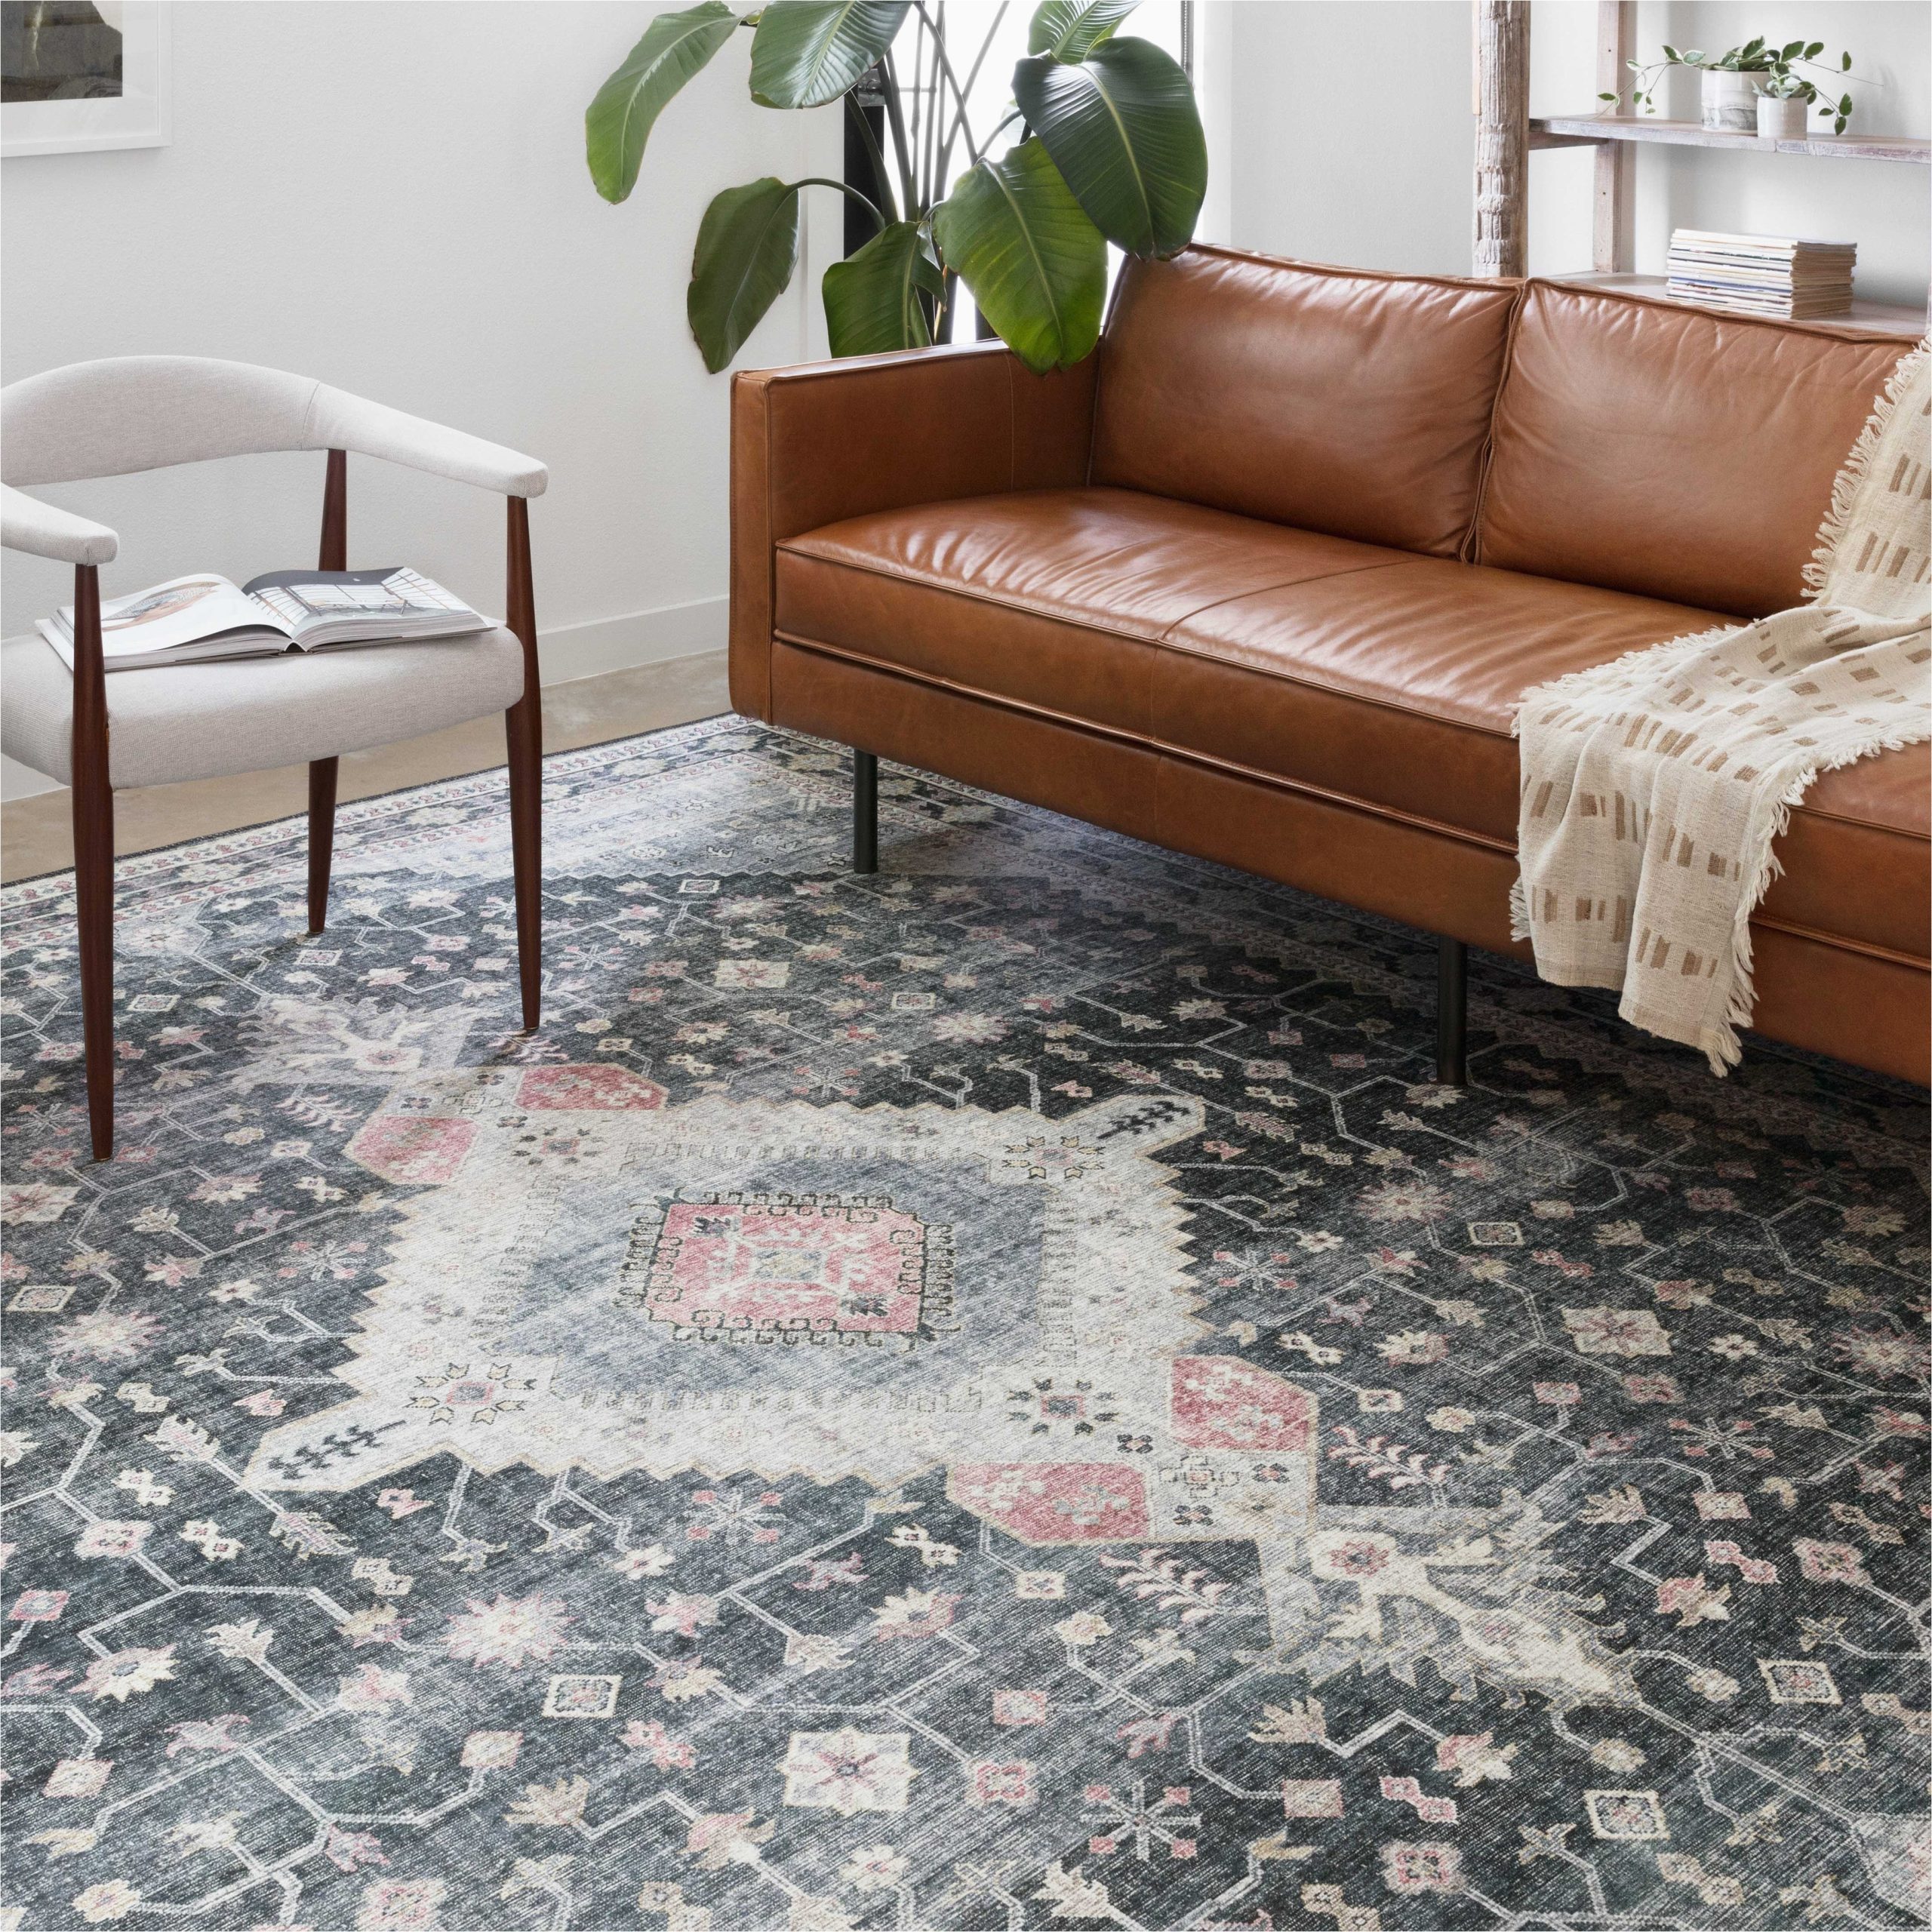 Alexander Home Leanne Traditional Distressed Printed area Rug Alexander Home Leanne Vintage Boho oriental Printed area Rug Charcoal / Multi 9′ X 12′ 9′ X 12′ Indoor Living Room, Bedroom, Dining Room Rectangle